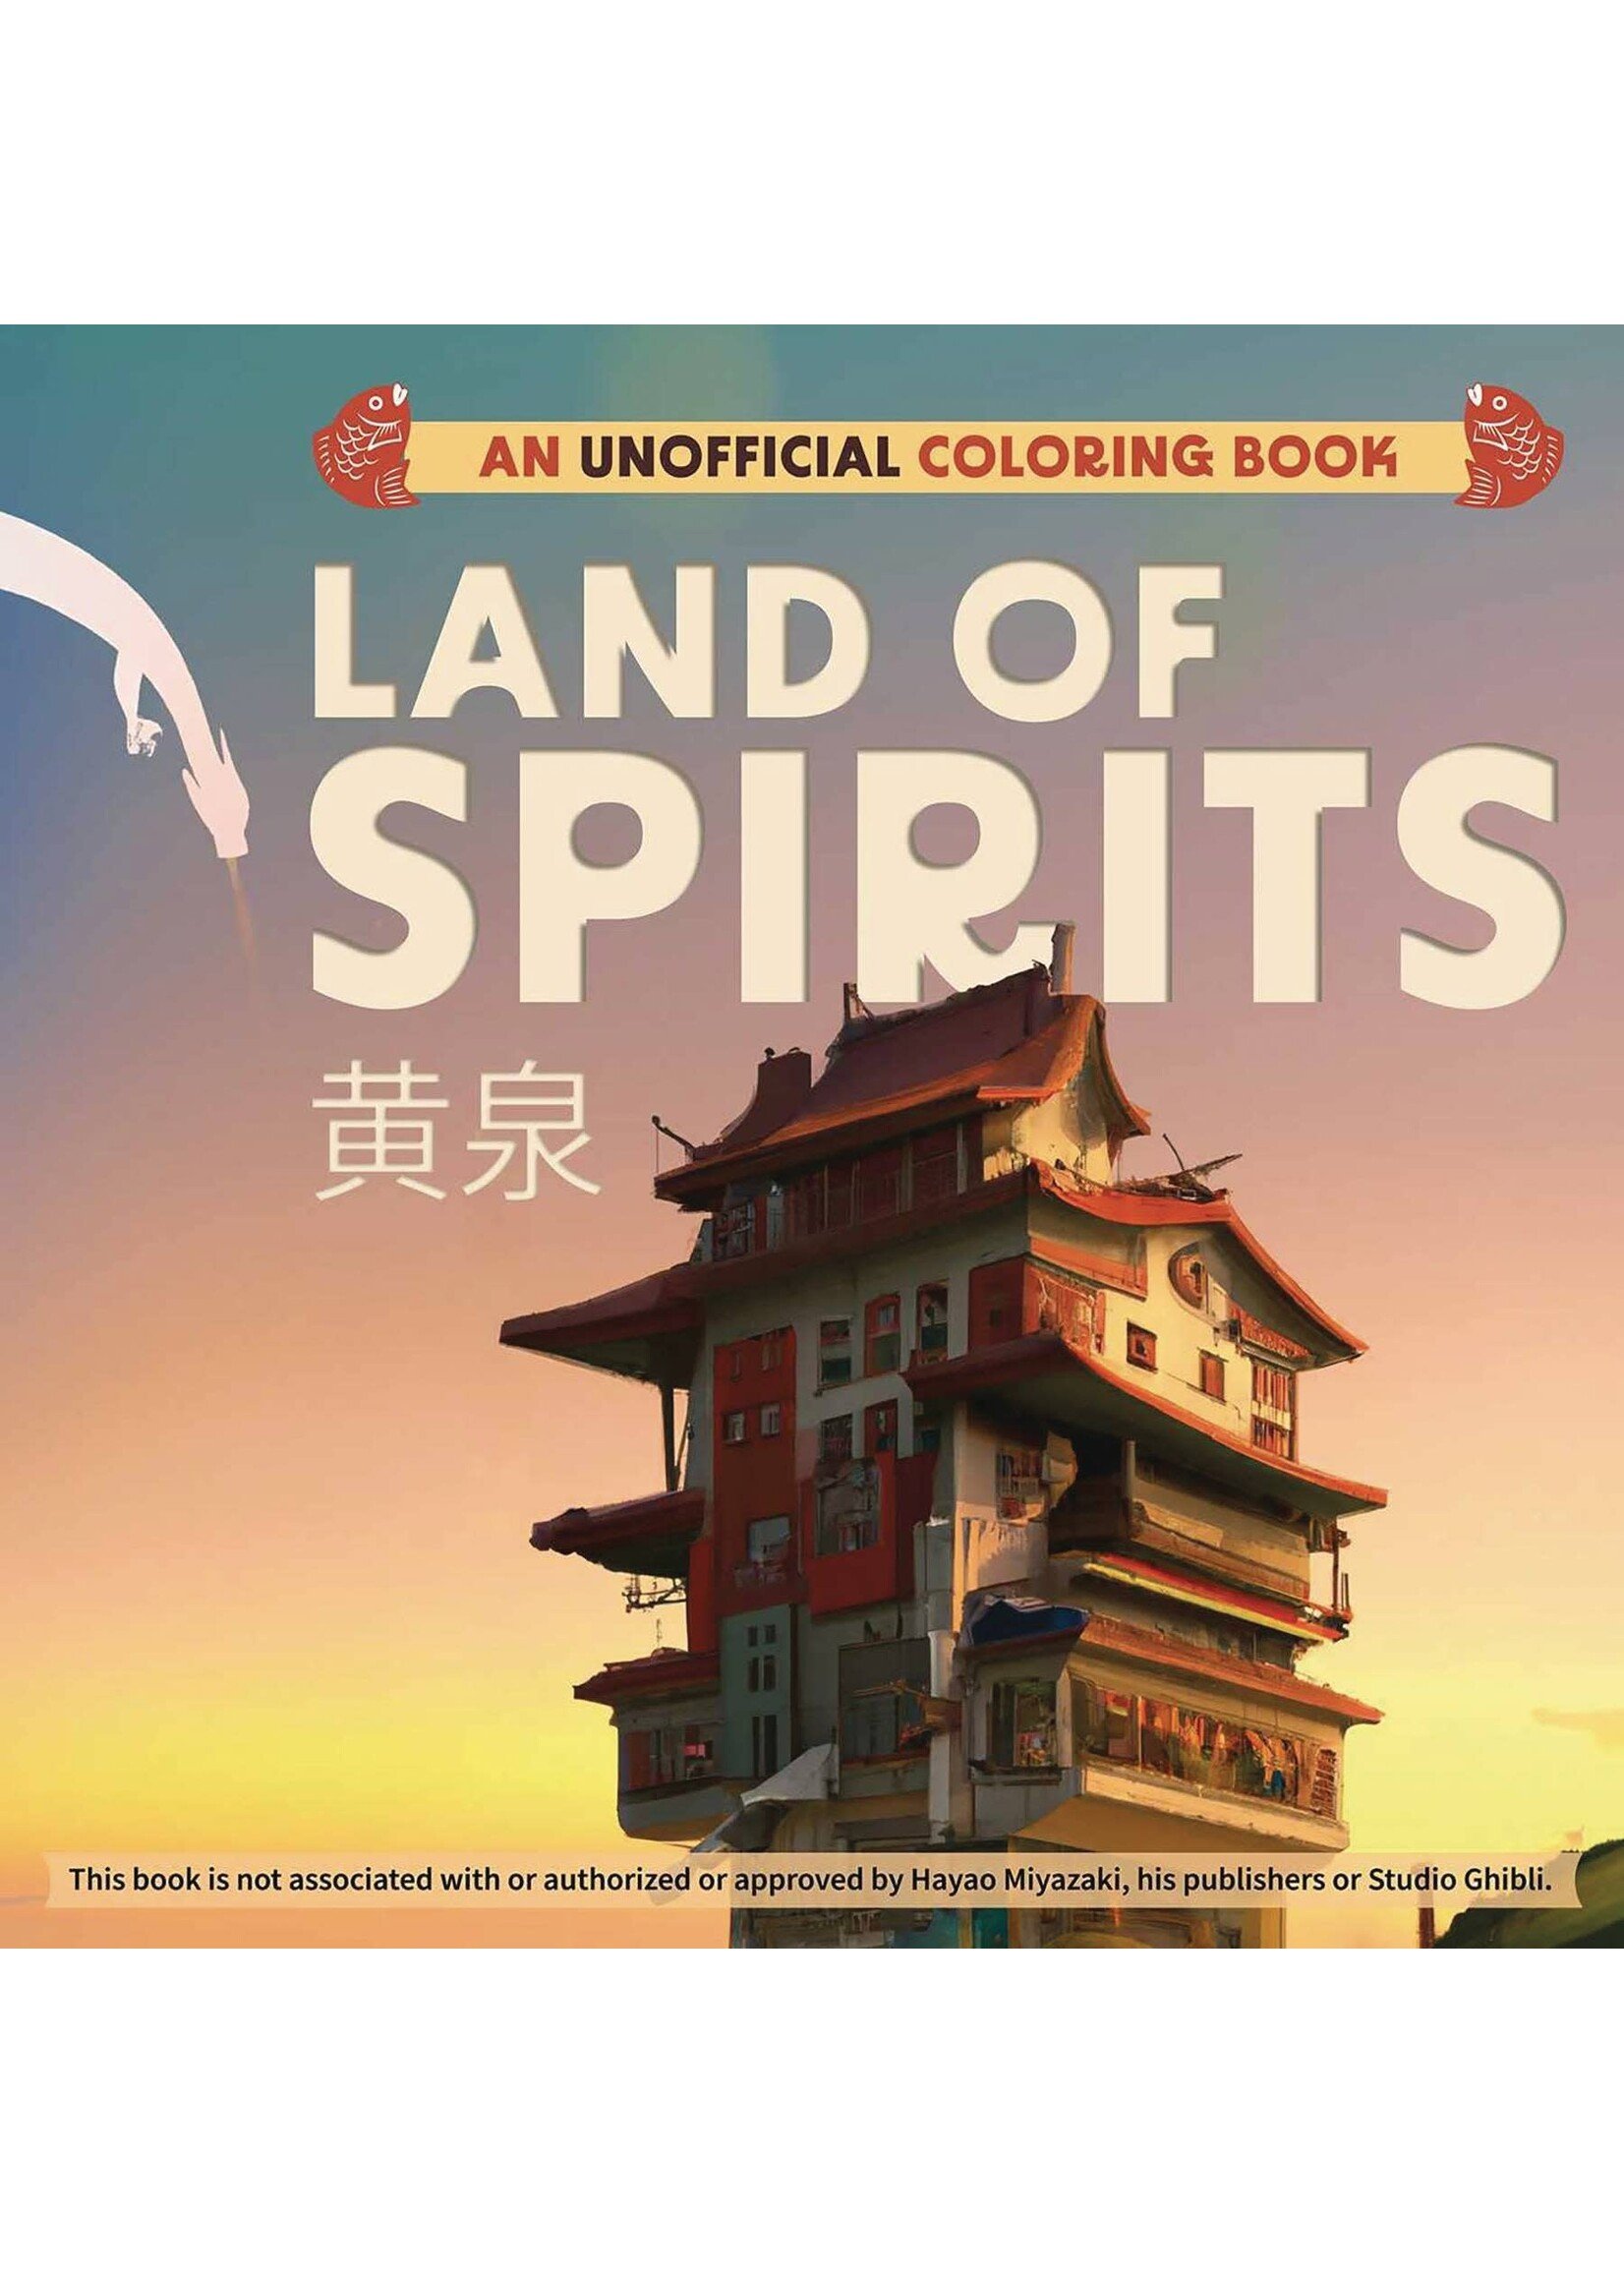 ULYSSES PRESS LAND OF SPIRITS UNOFFICIAL COLORING BOOK